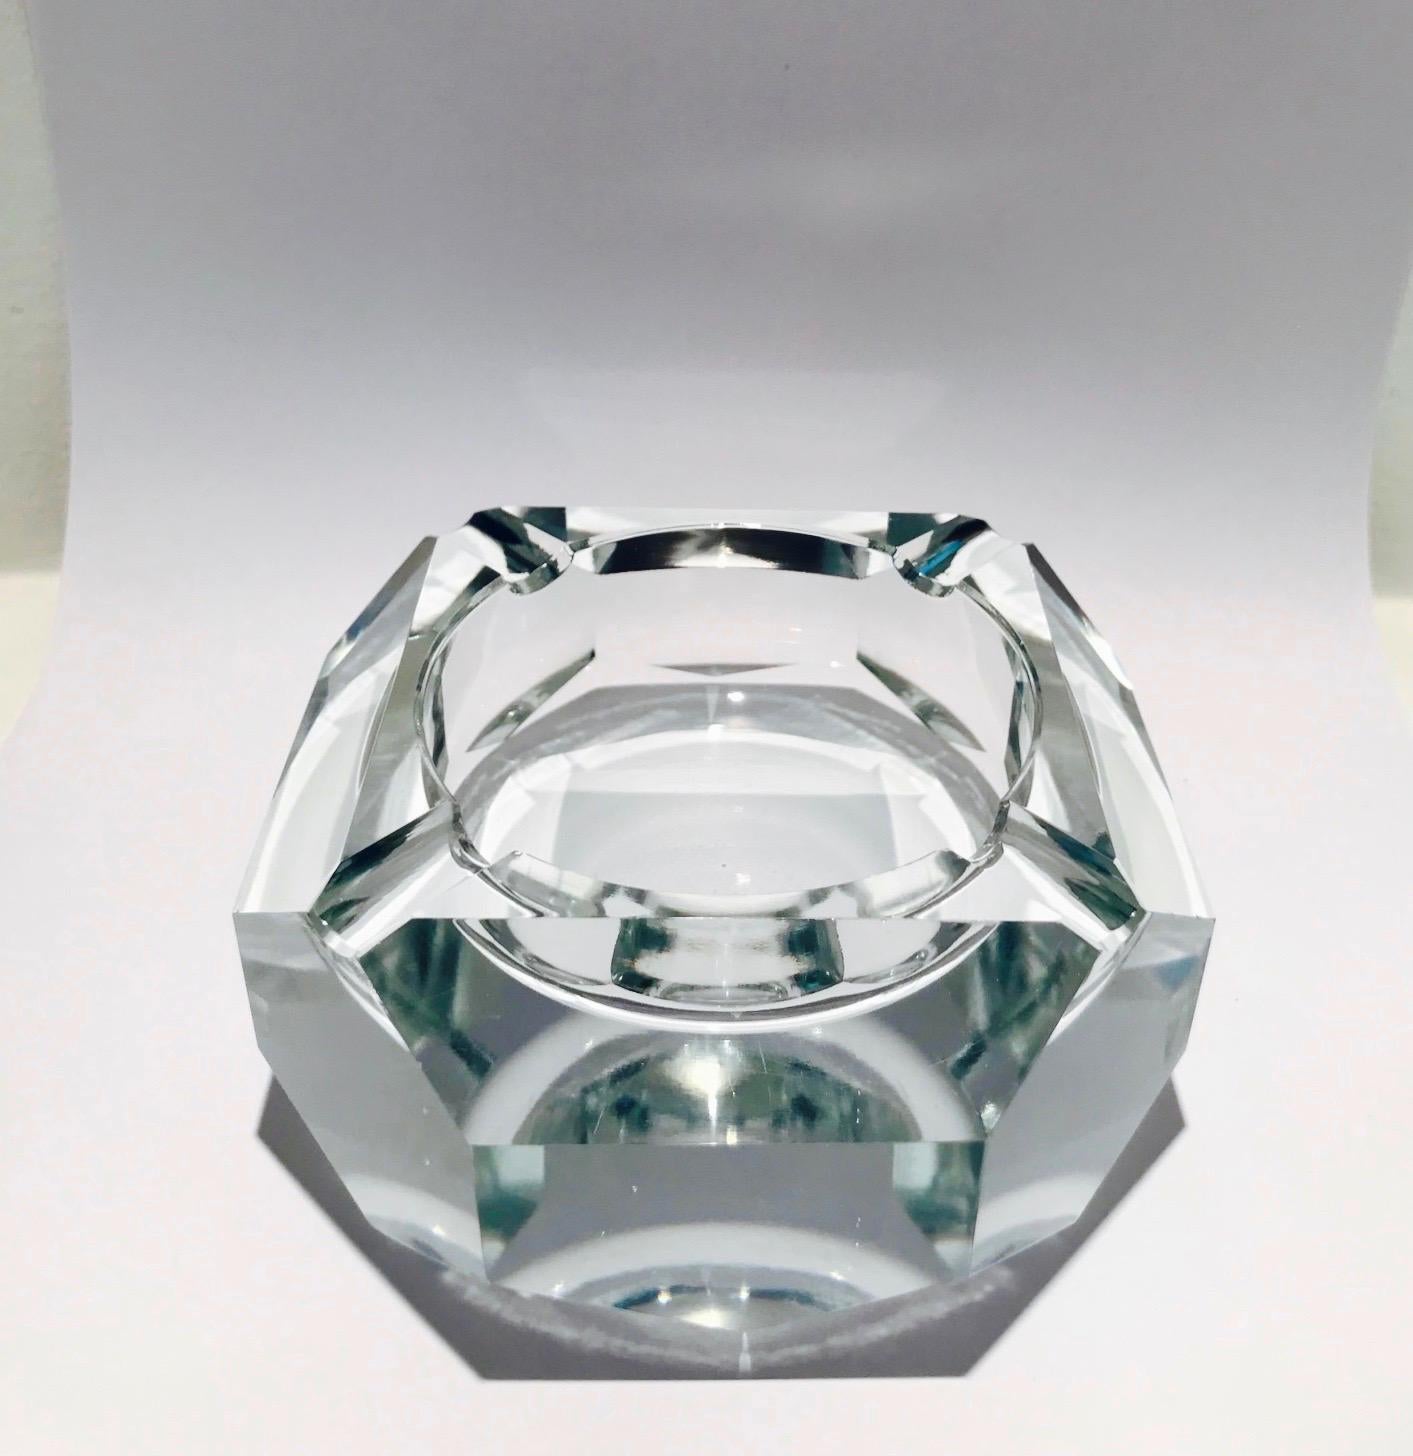 Stunning cut crystal ashtray with faceted design creating prisms of light. The ashtray has eight sides, but is predominantly square in form. Shines like a diamond and is heavy in weight. Fitted with four notches for cigarettes, or can be used as